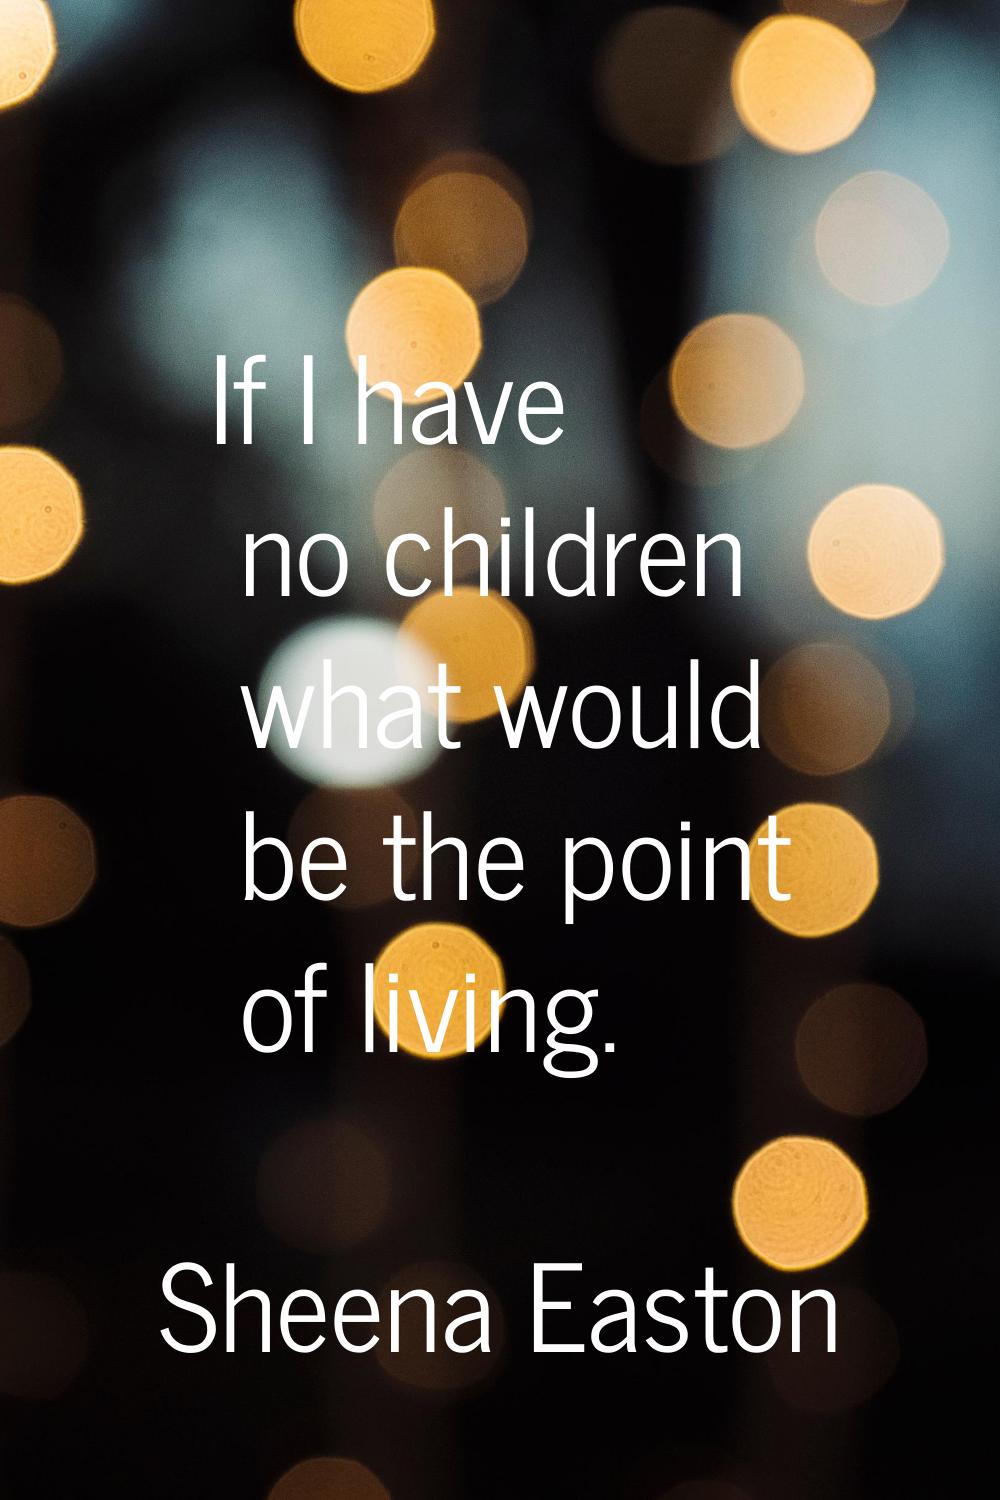 If I have no children what would be the point of living.